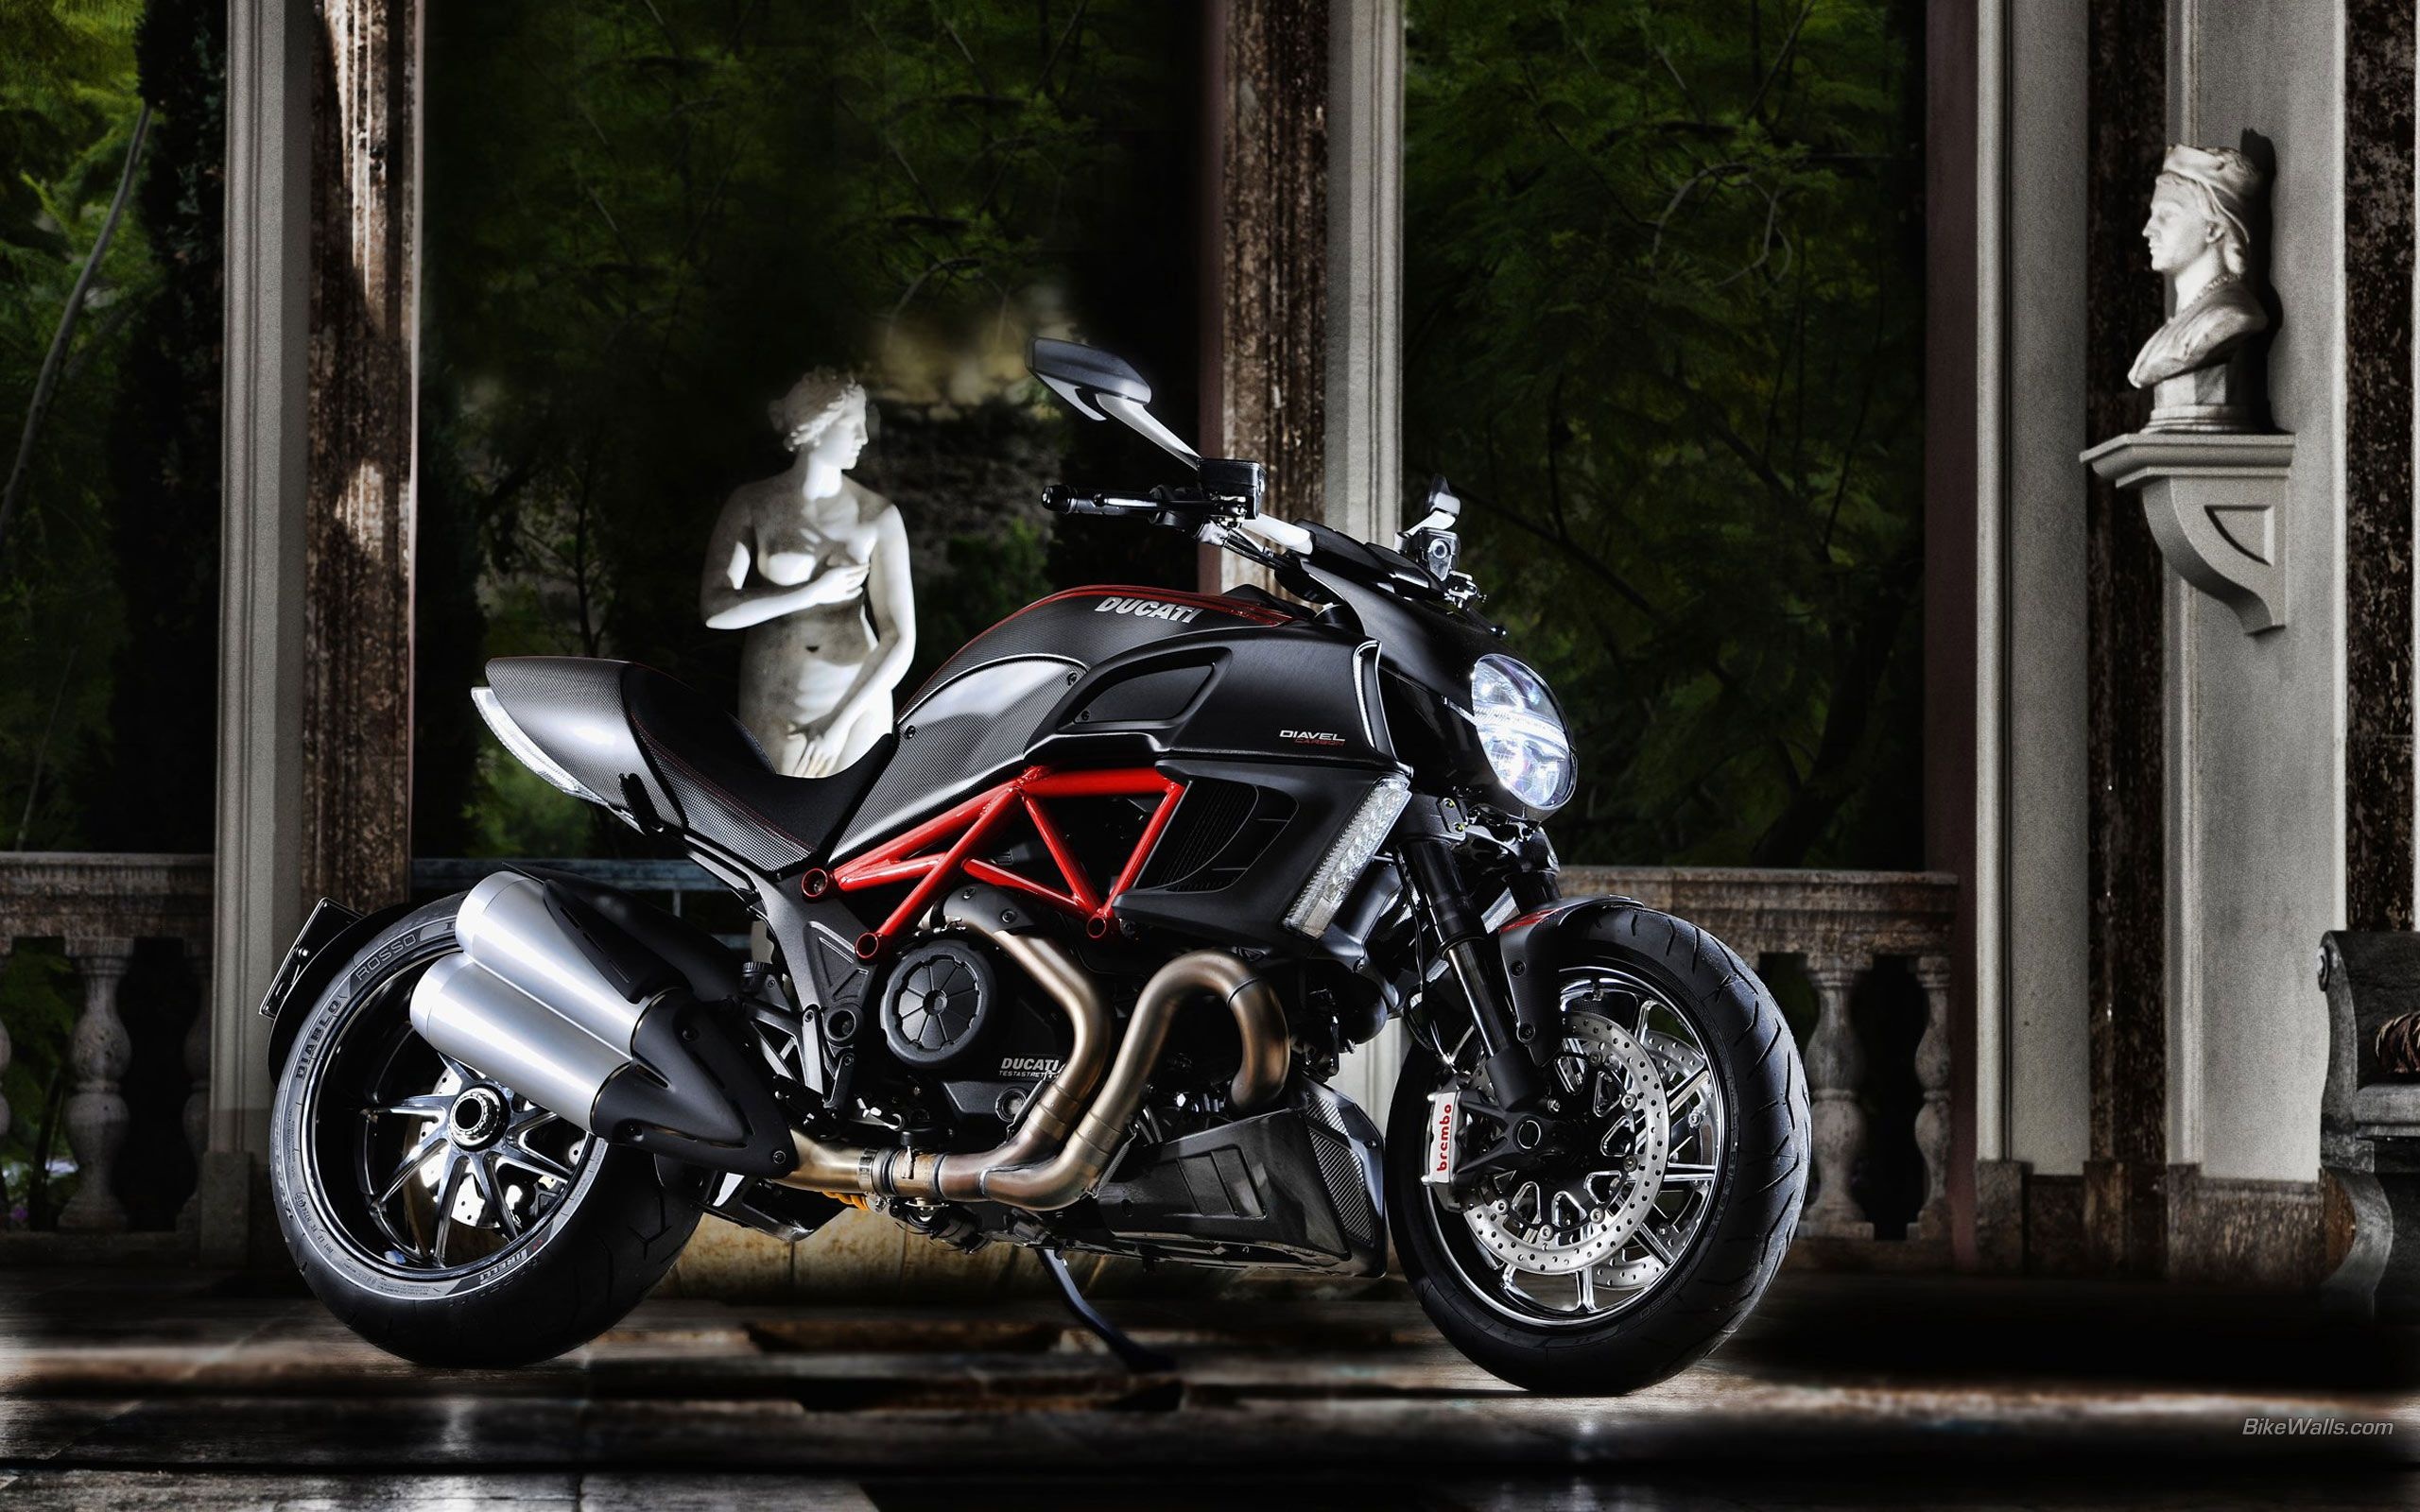 Ducati XDiavel auto, Motorcycle wallpaper, Carbon edition, High-quality images, 2560x1600 HD Desktop